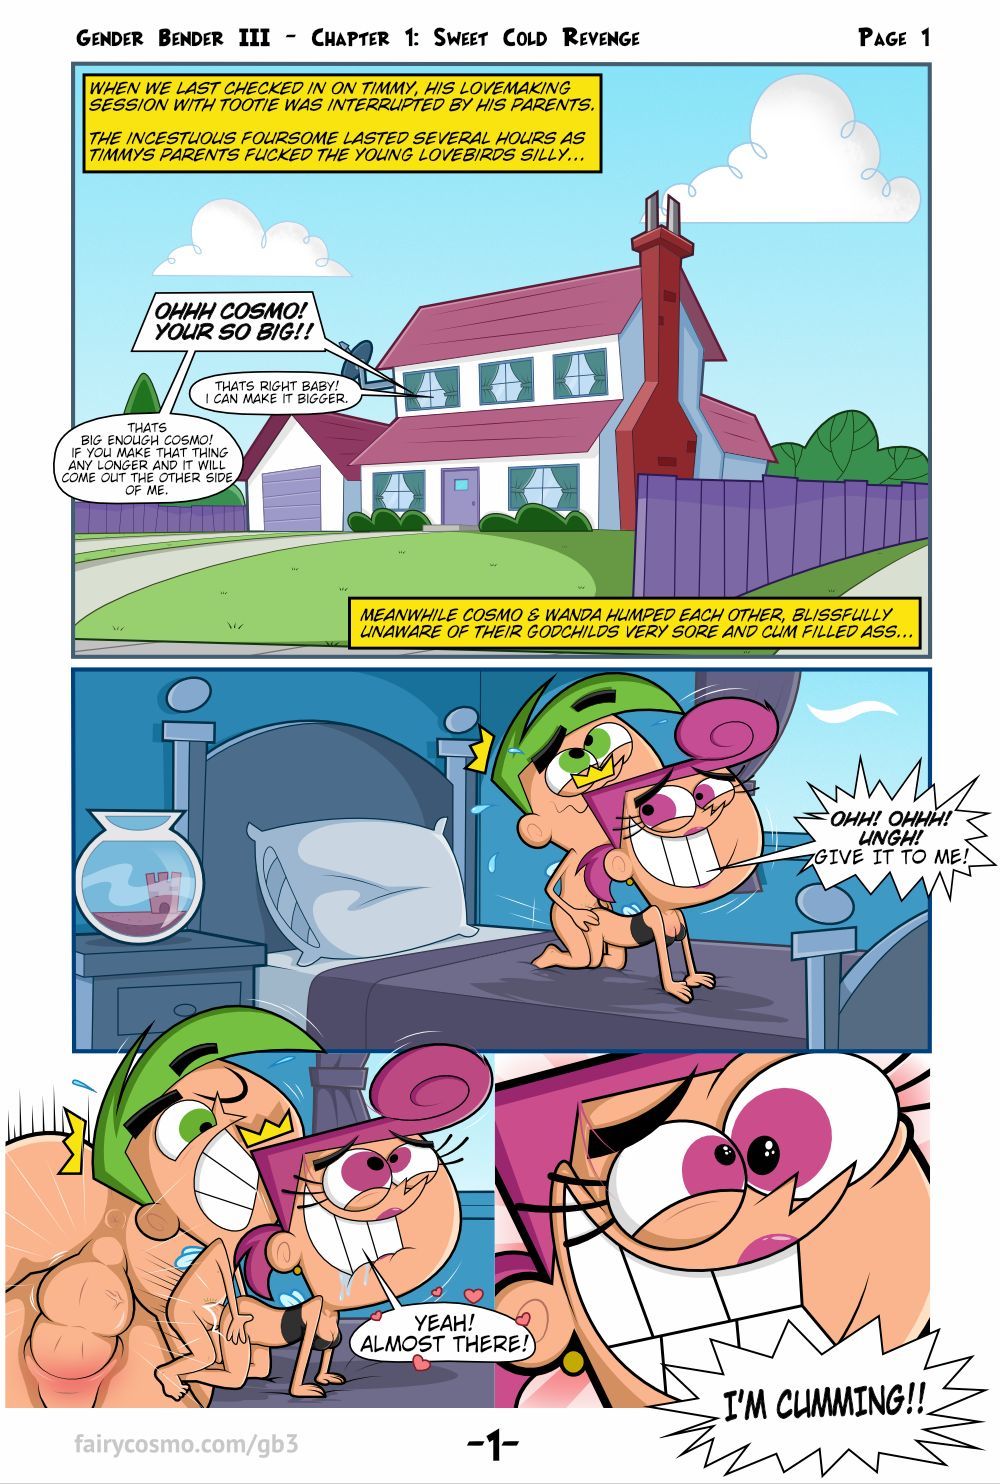 Fairly OddParents - Gender Bender III (Fairycosmo) page 2